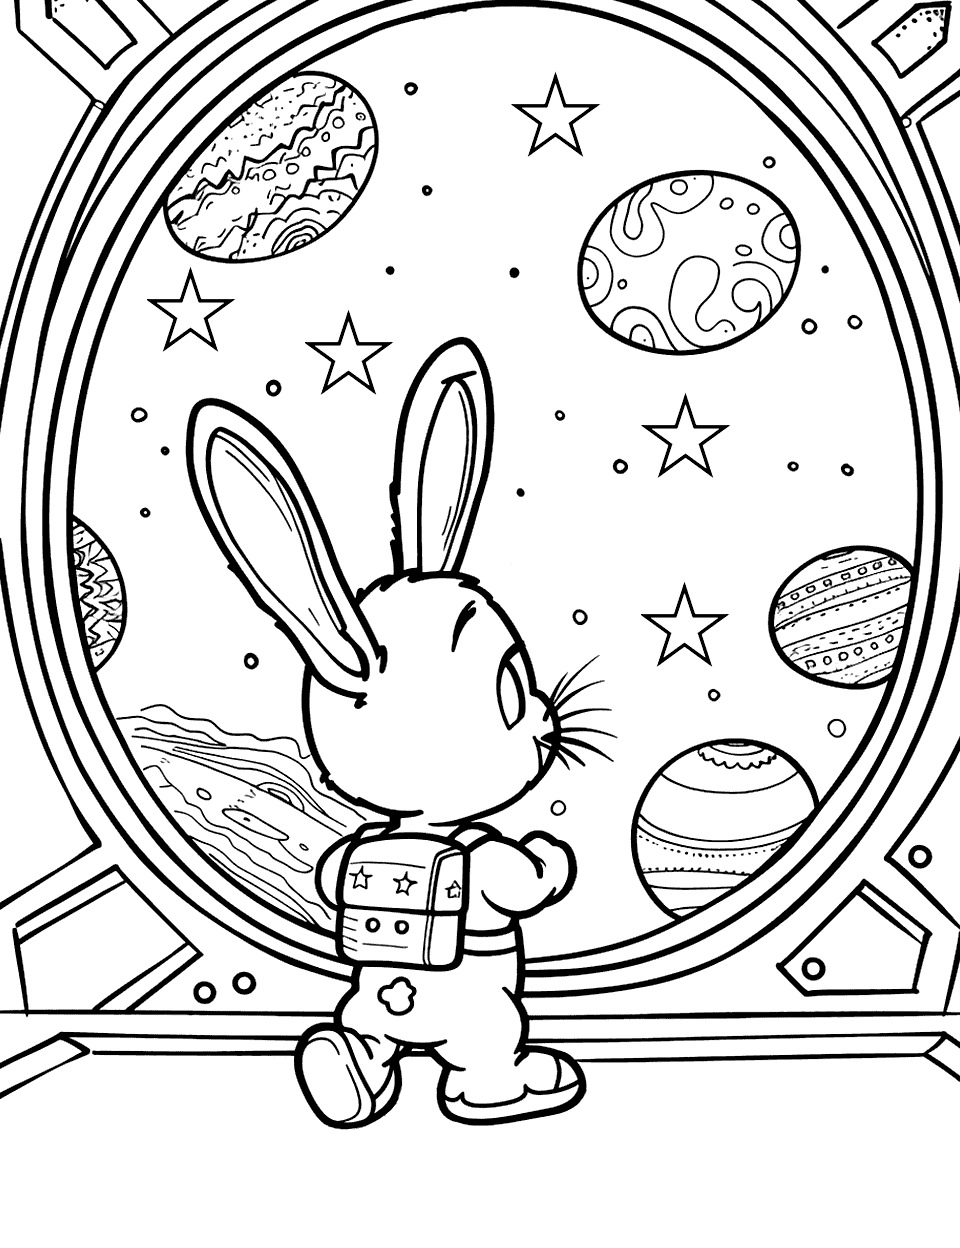 Bunny's Space Adventure Easter Bunny Coloring Page - A bunny in a small spaceship window looking out at the stars, with Easter eggs floating in zero gravity.